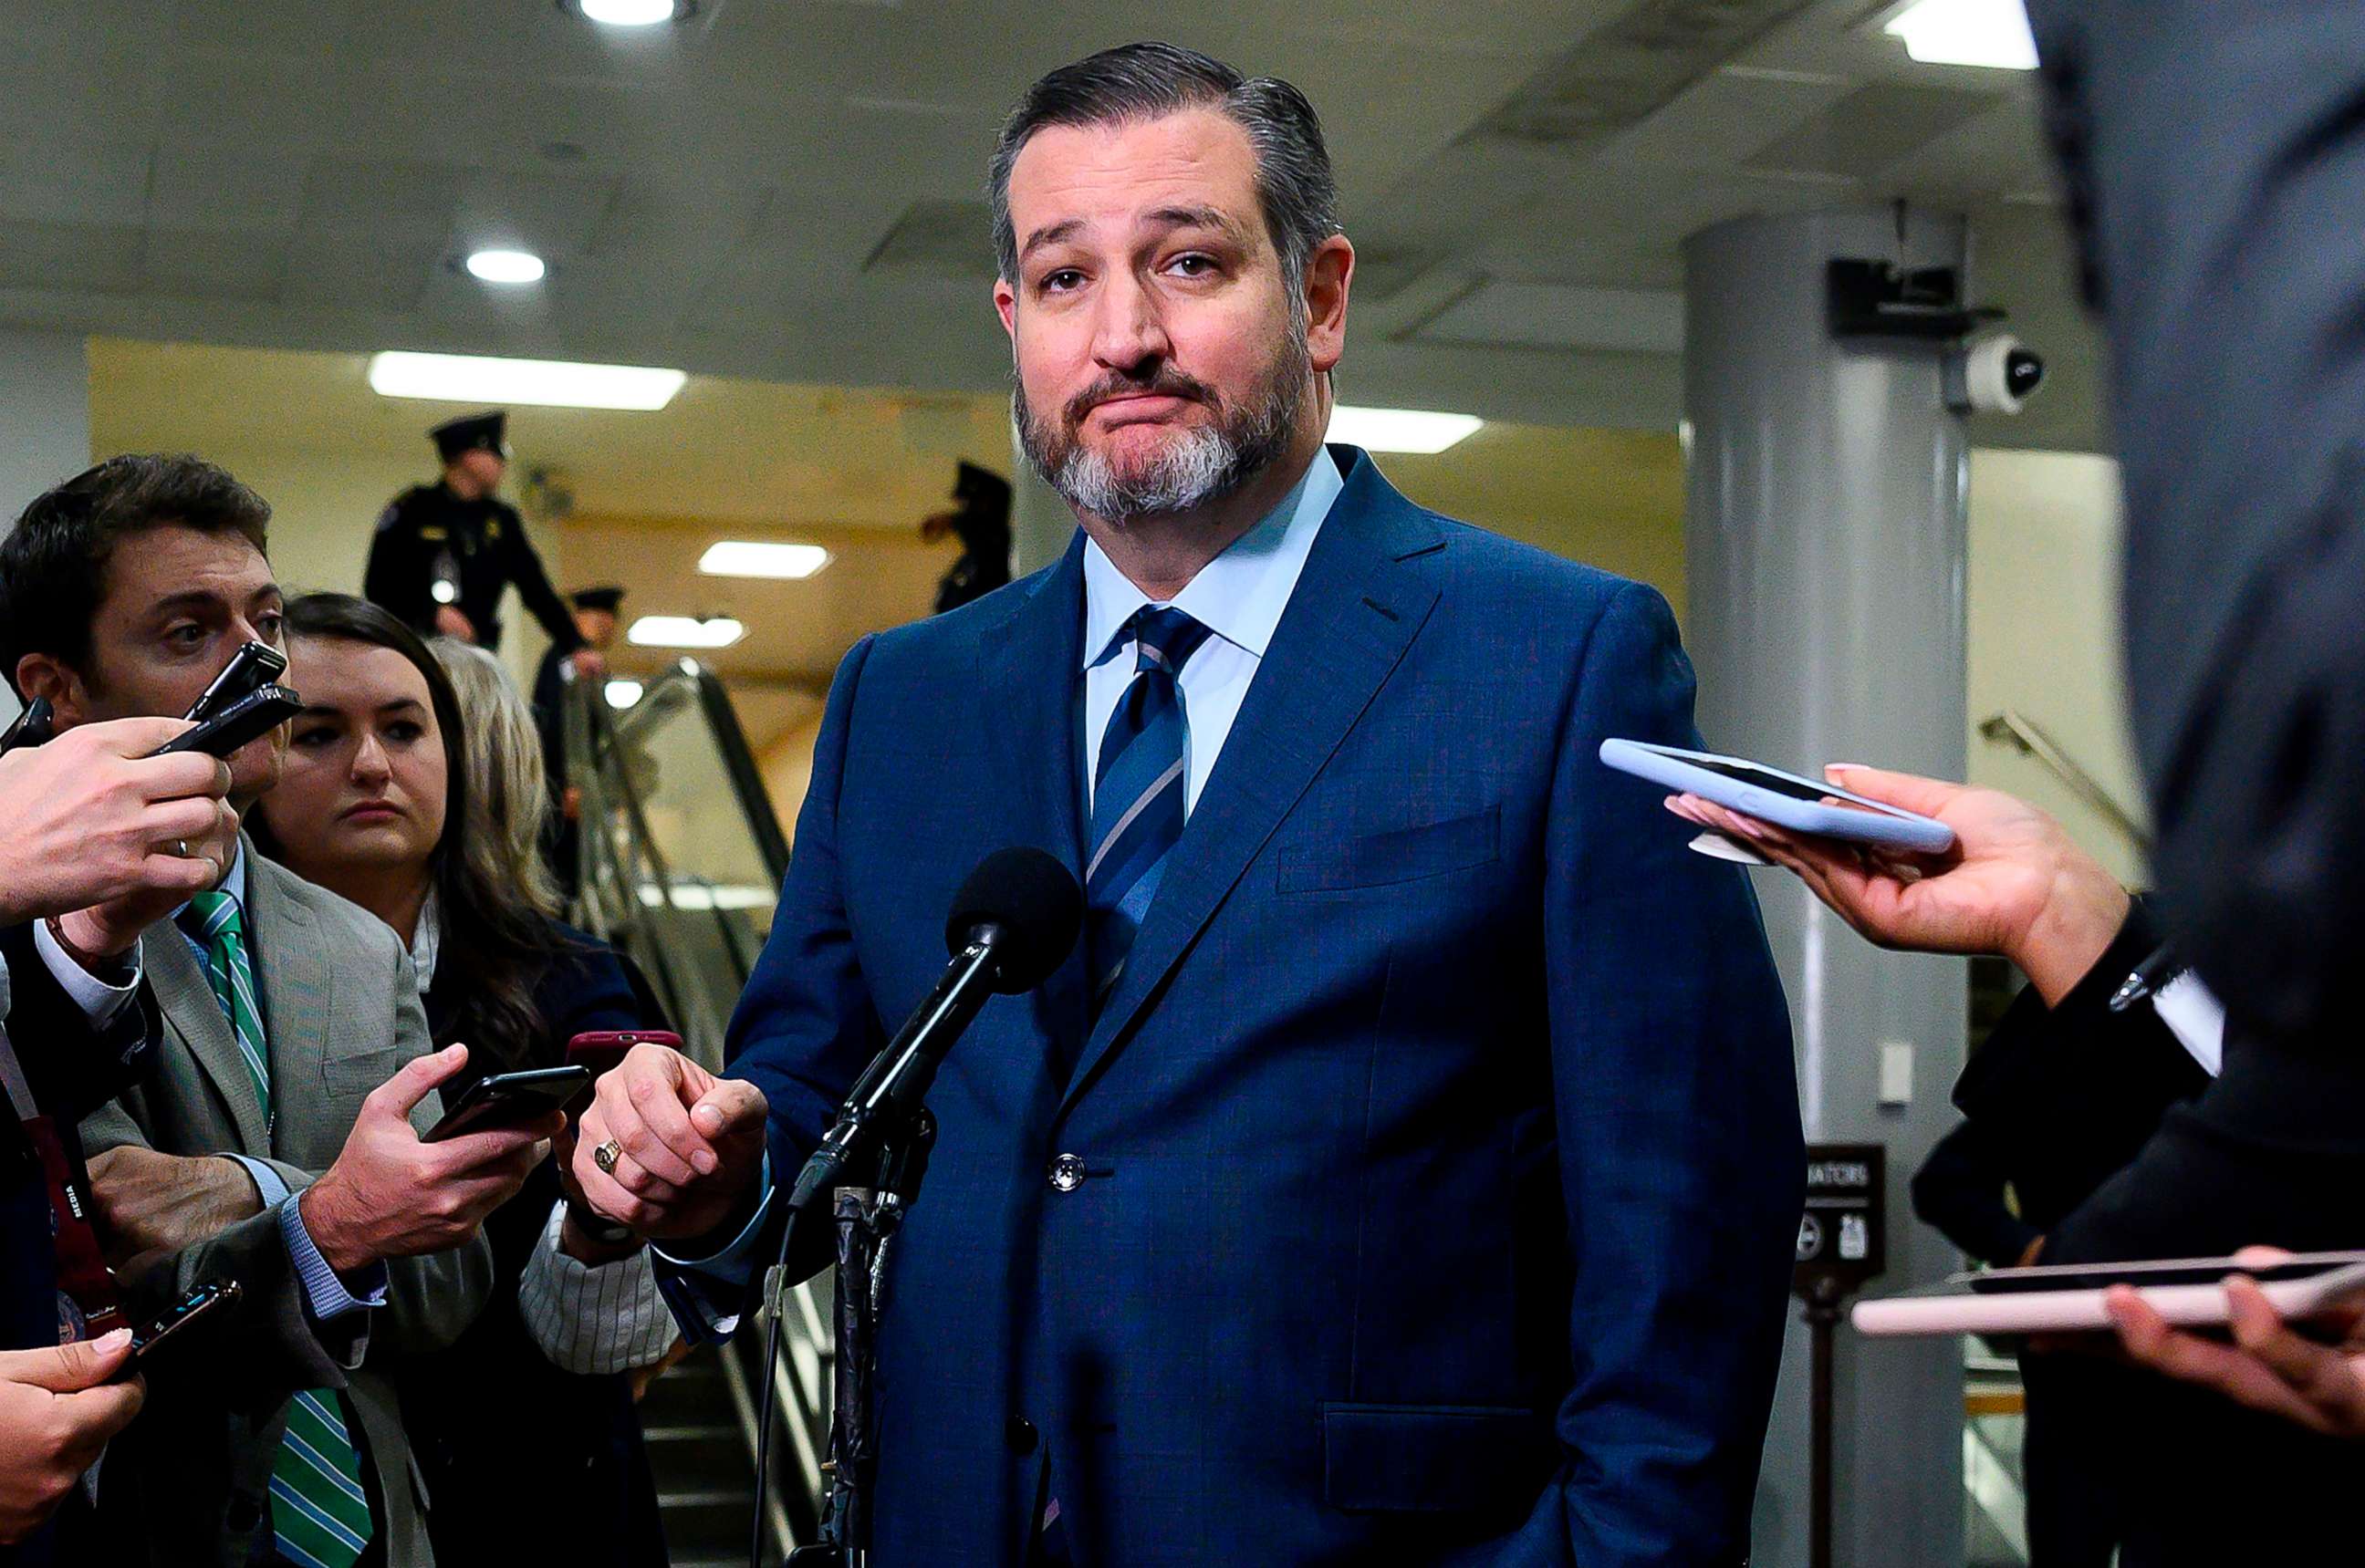 PHOTO: In this file photo taken on Jan. 23, 2020, Sen. Ted Cruz, R-Texas, speaks during a press conference during a break in the Senate impeachment trial of President Donald Trump at the Capitol in Washington, D.C.